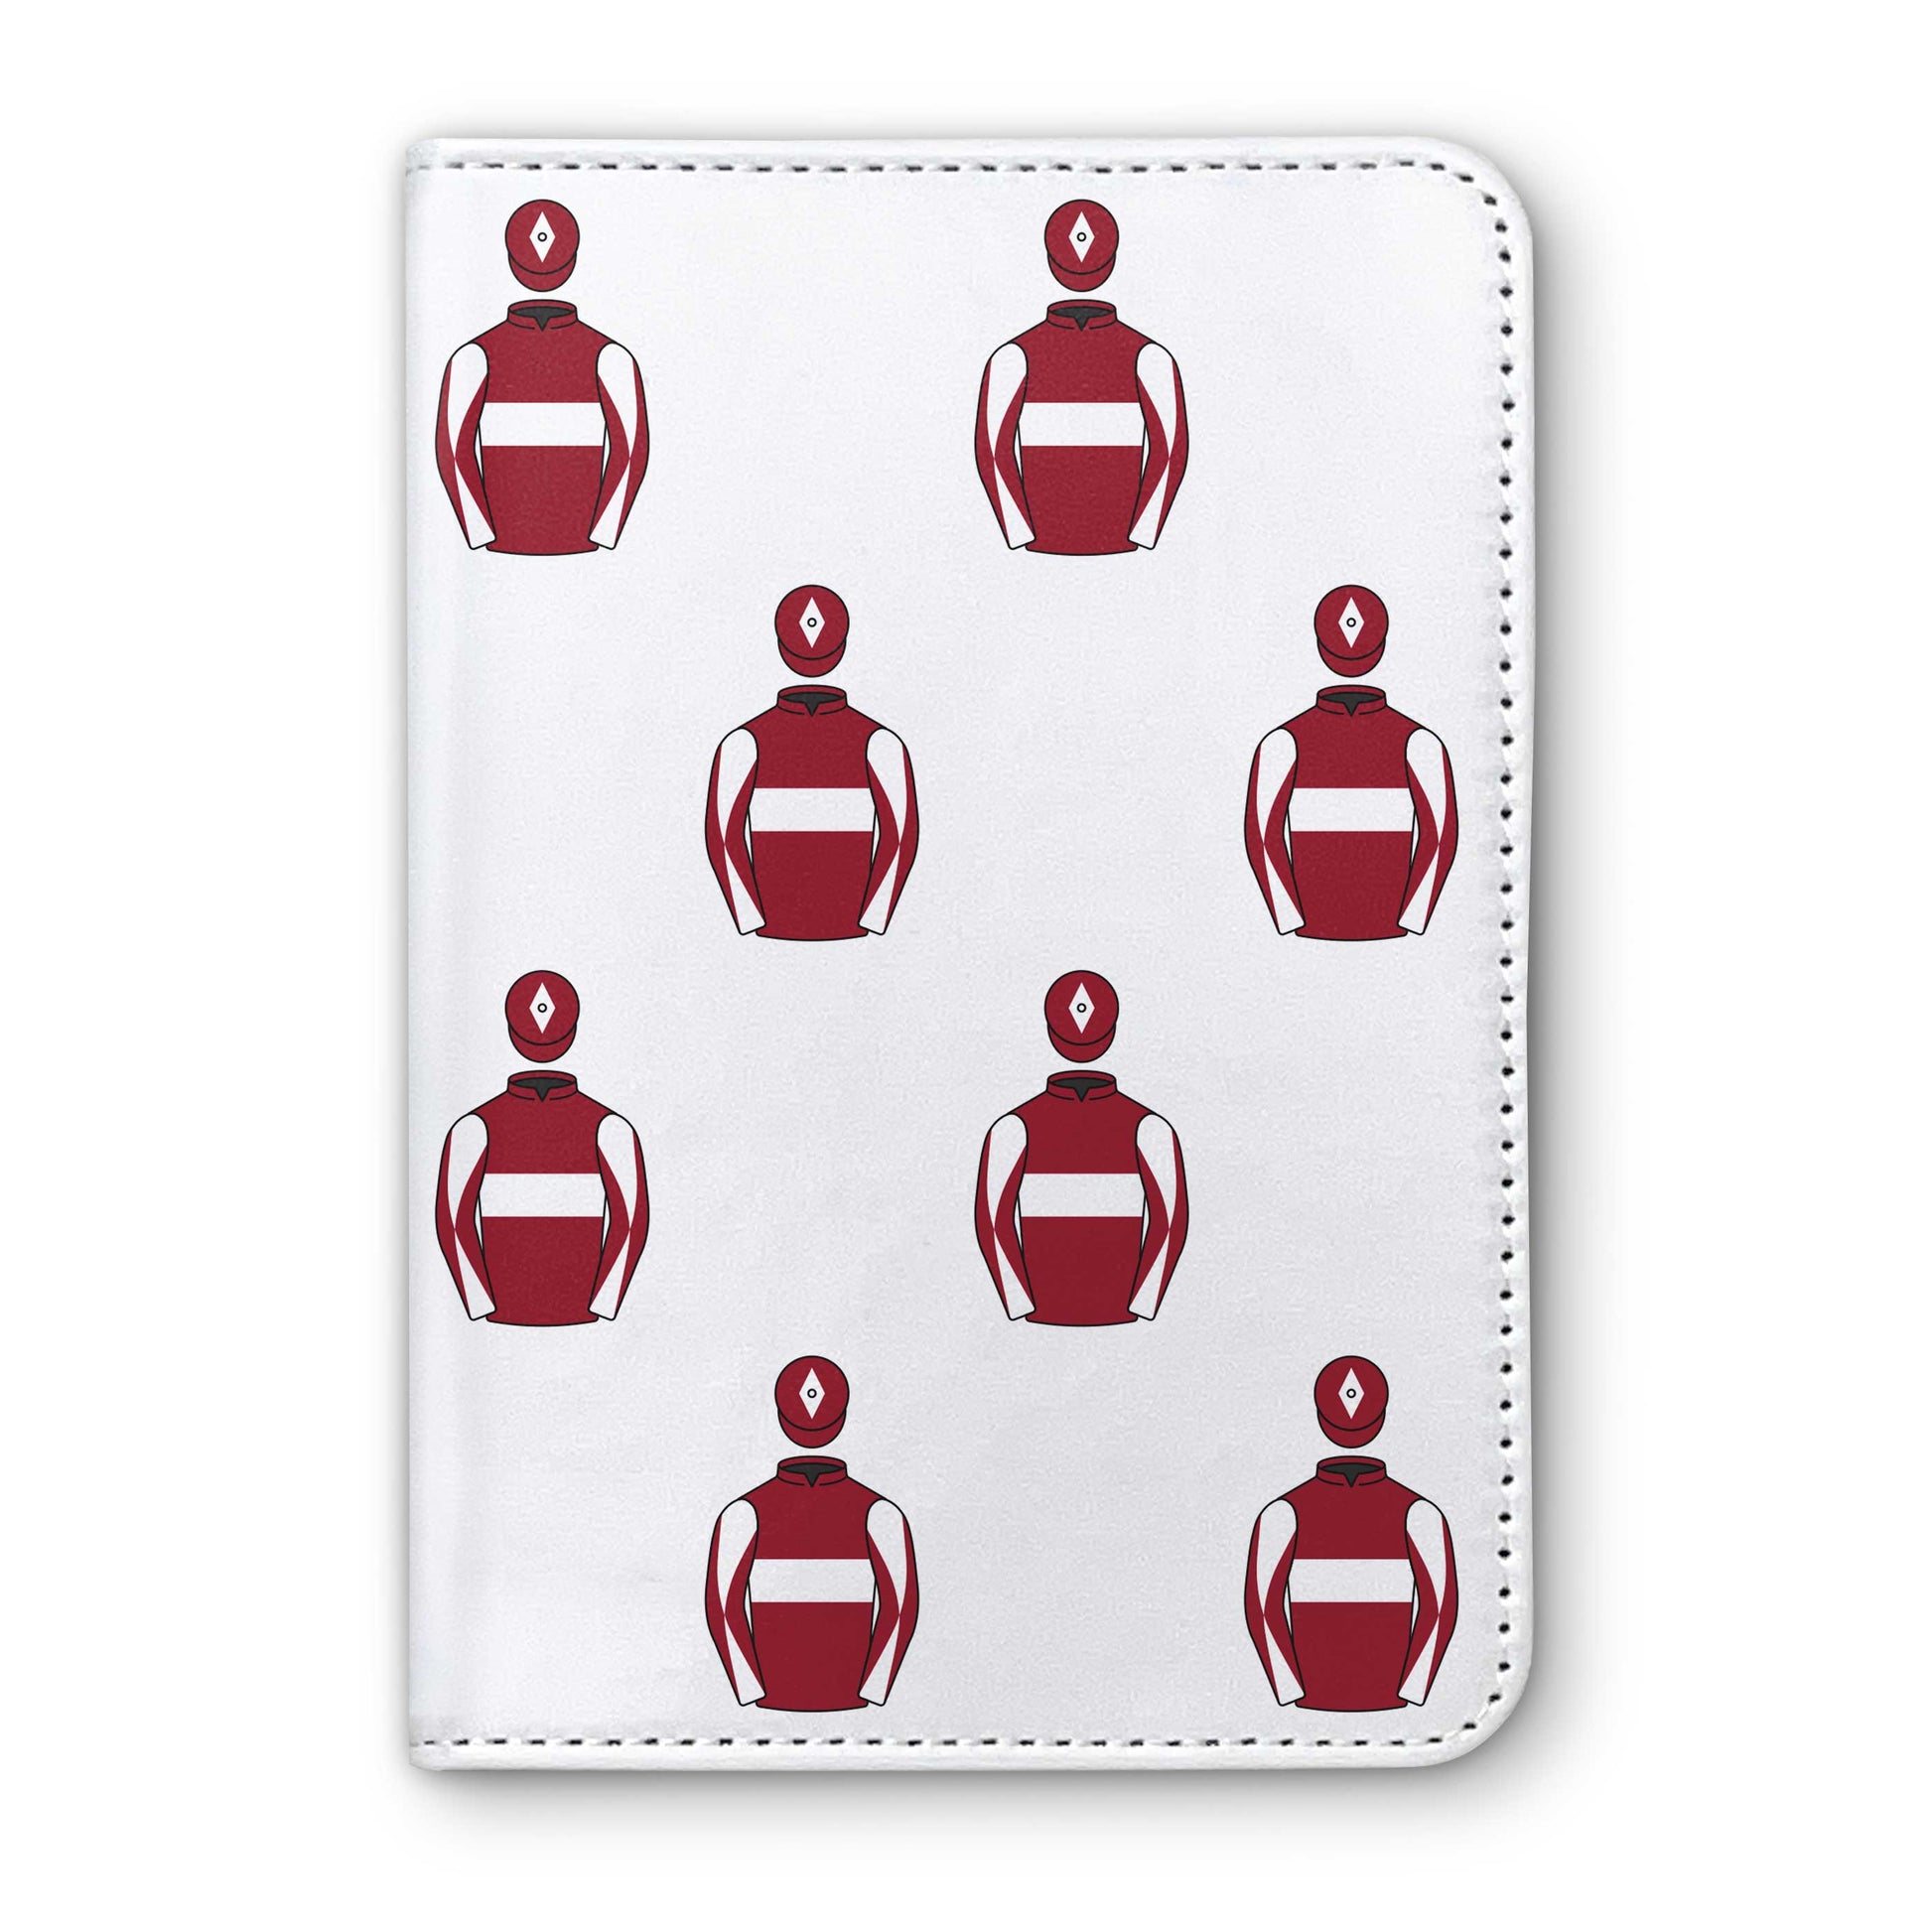 P Hickey Horse Racing Passport Holder - Hacked Up Horse Racing Gifts